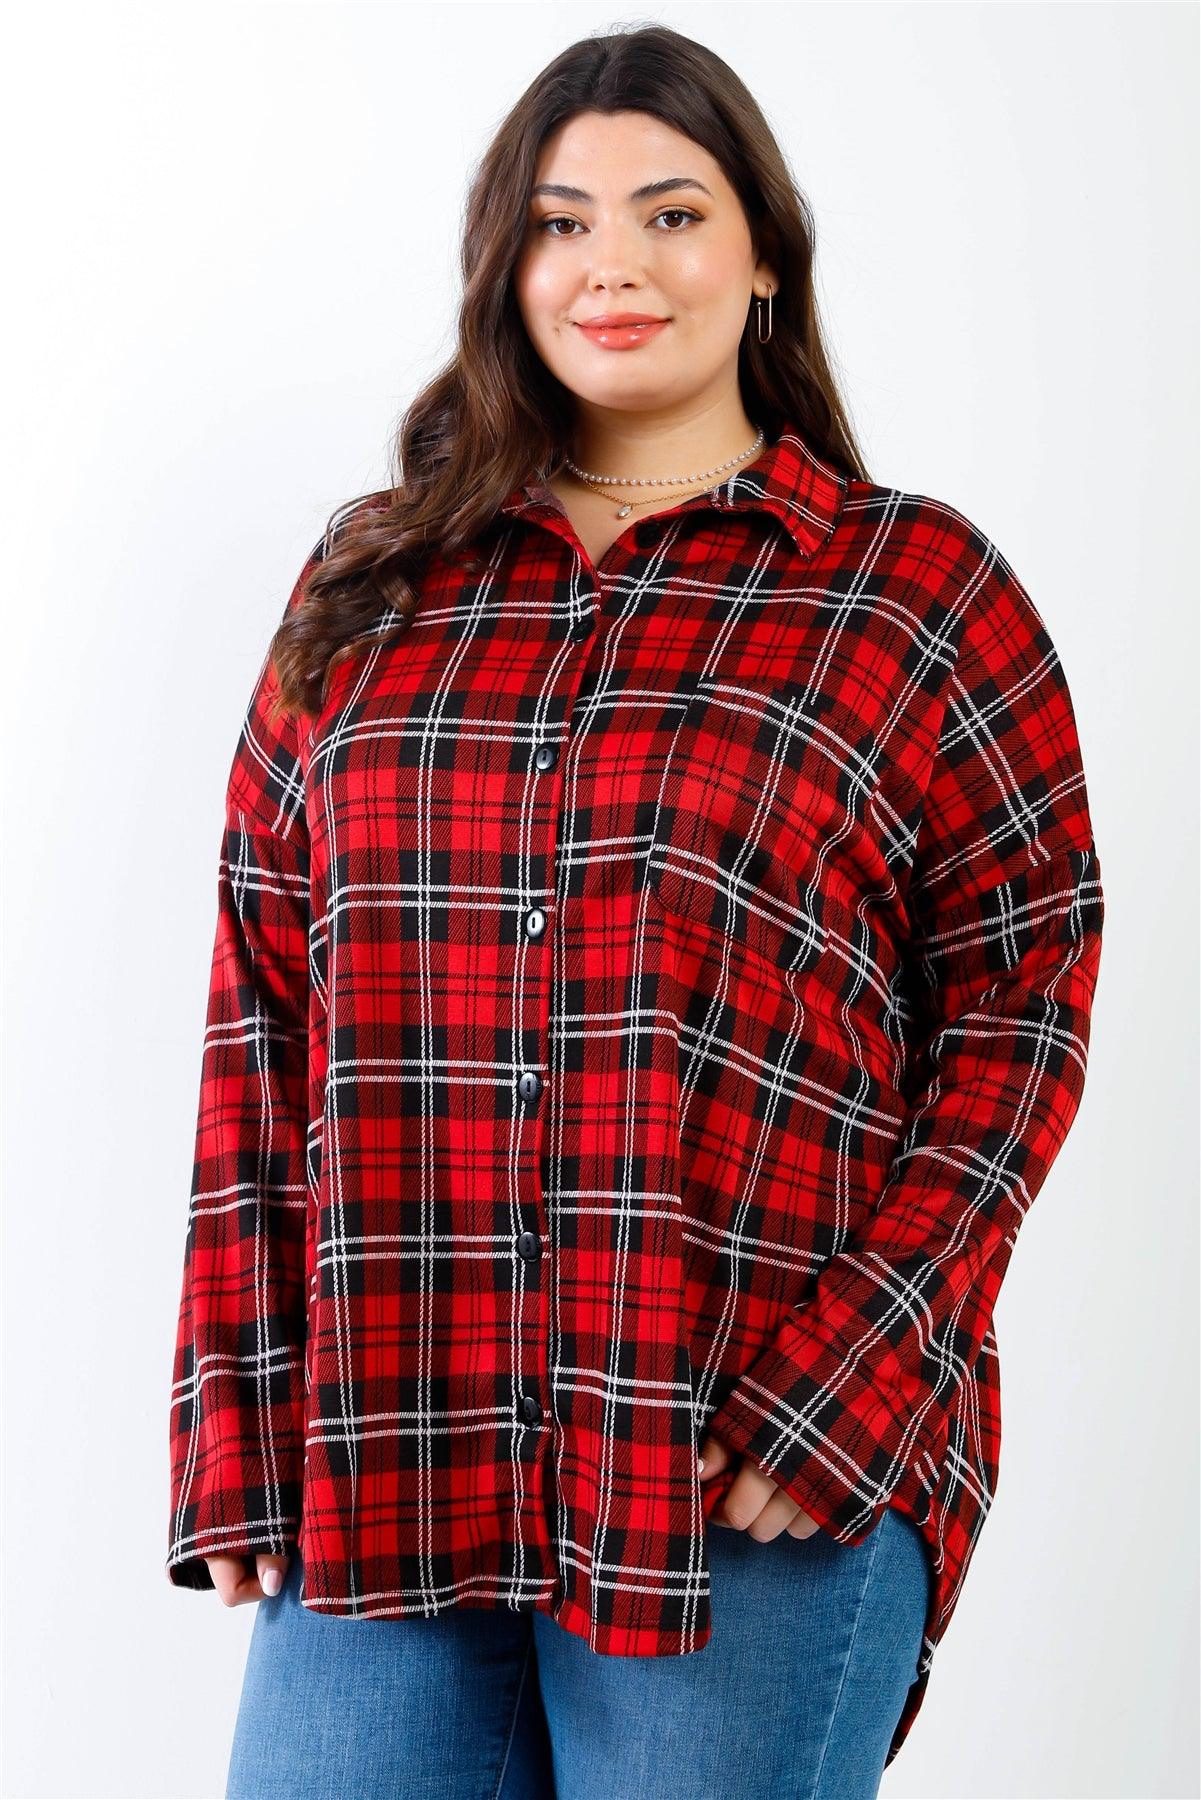 Junior Plus Black & Red Plaid Collared Button Up Shirt Top /2-2-2